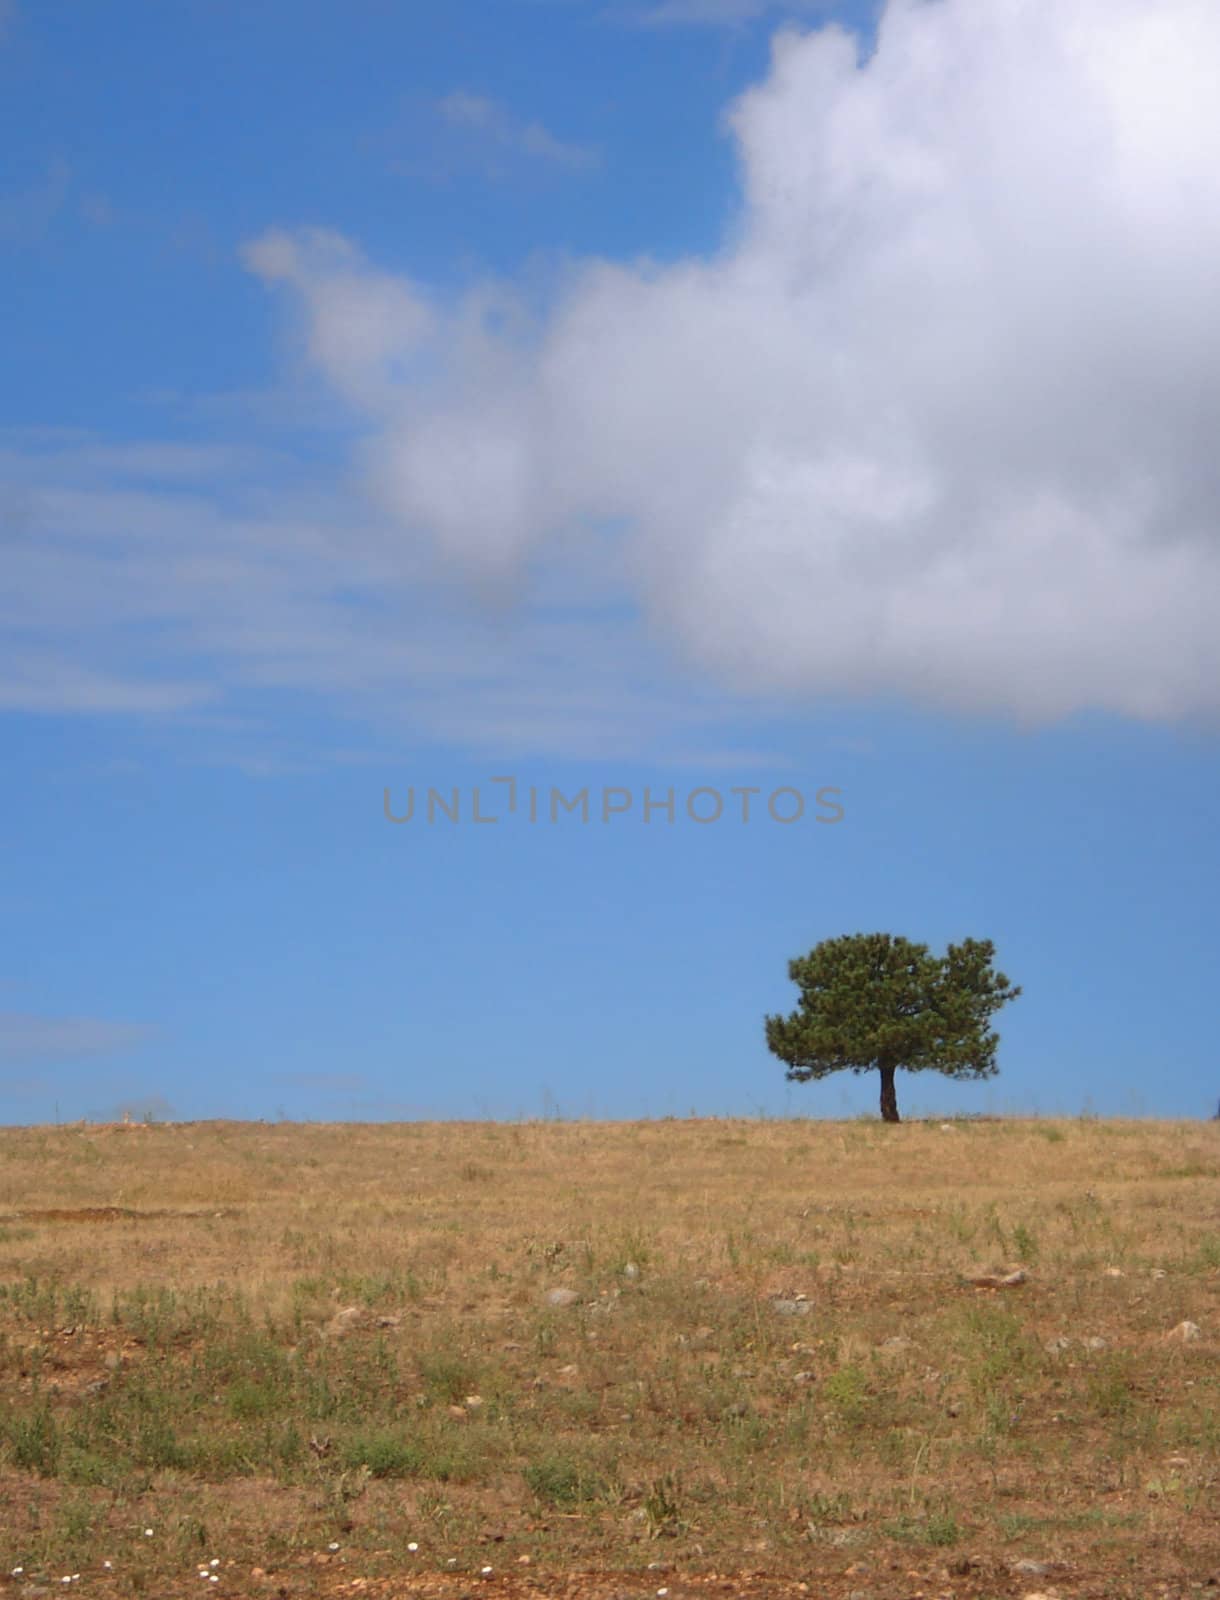 A single tree sits in a field with a cloud in the sky above.